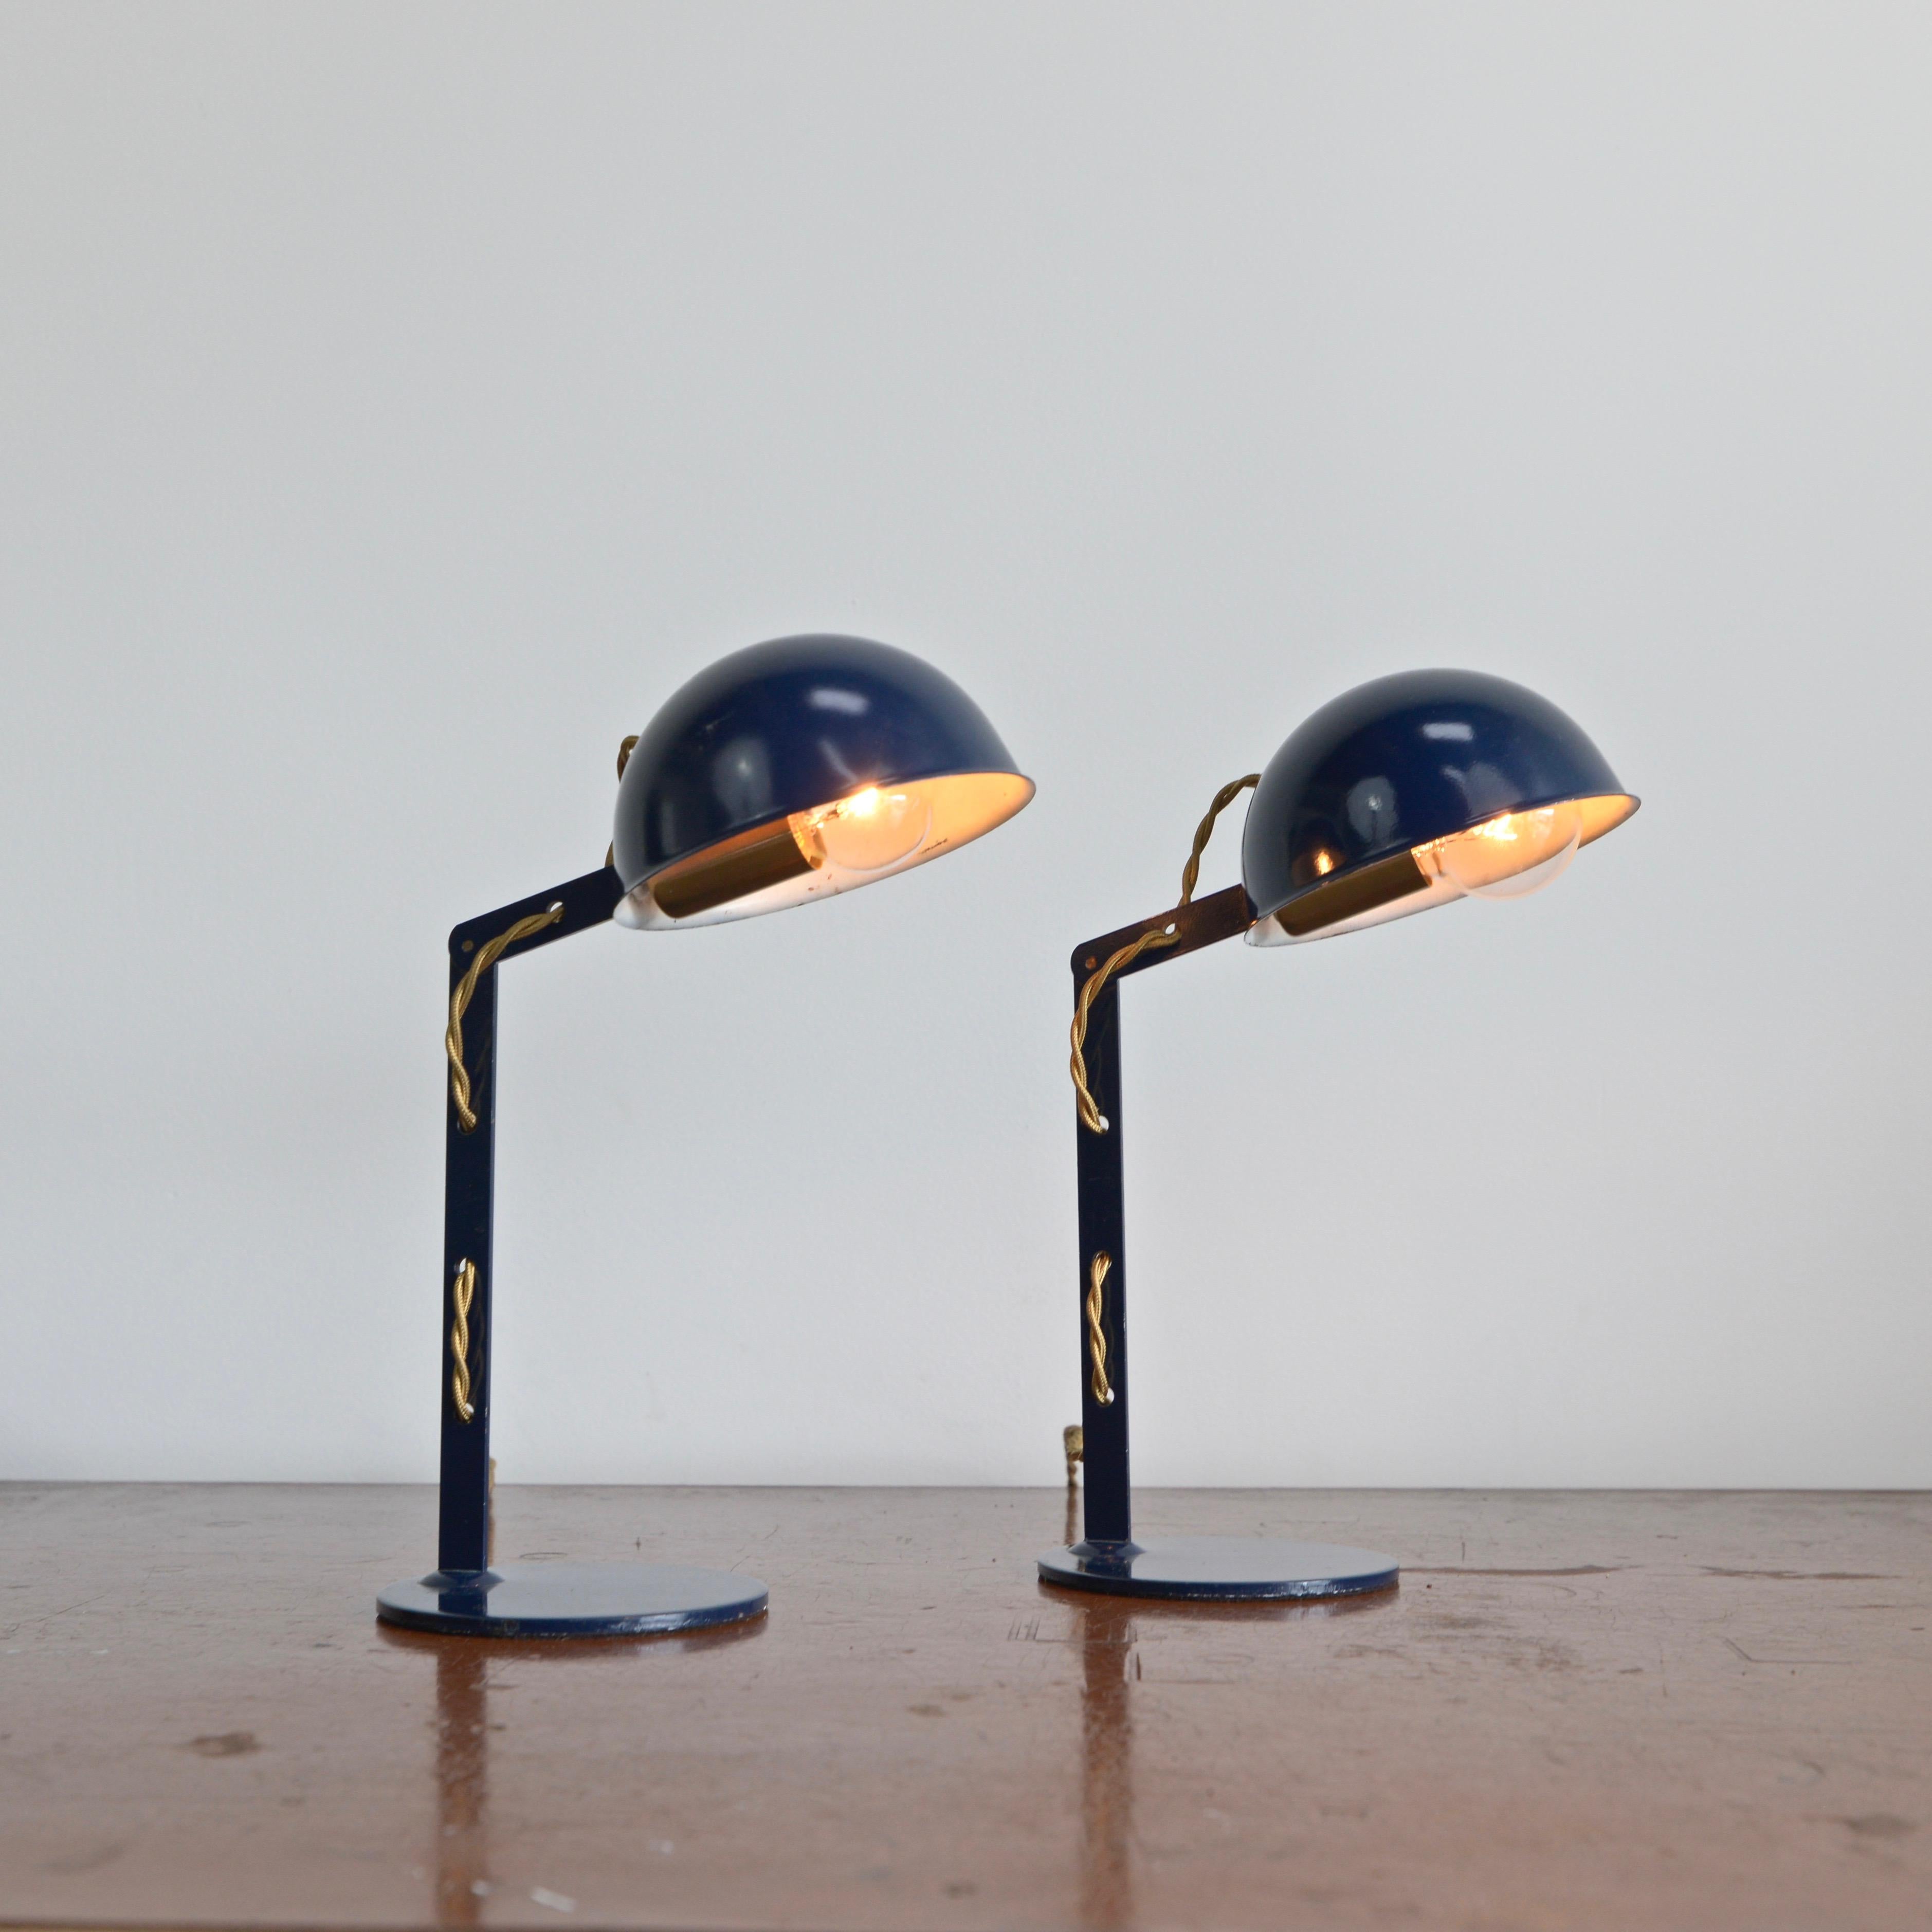 A pair of vintage Italian petite industrial table lamps from the 1950s. In steel and brass. Fully rewired with a single E12 candelabra based socket per table lamp, ready to be used in the USA. Sold as a pair.
Measurements:
Height 11”
Shade